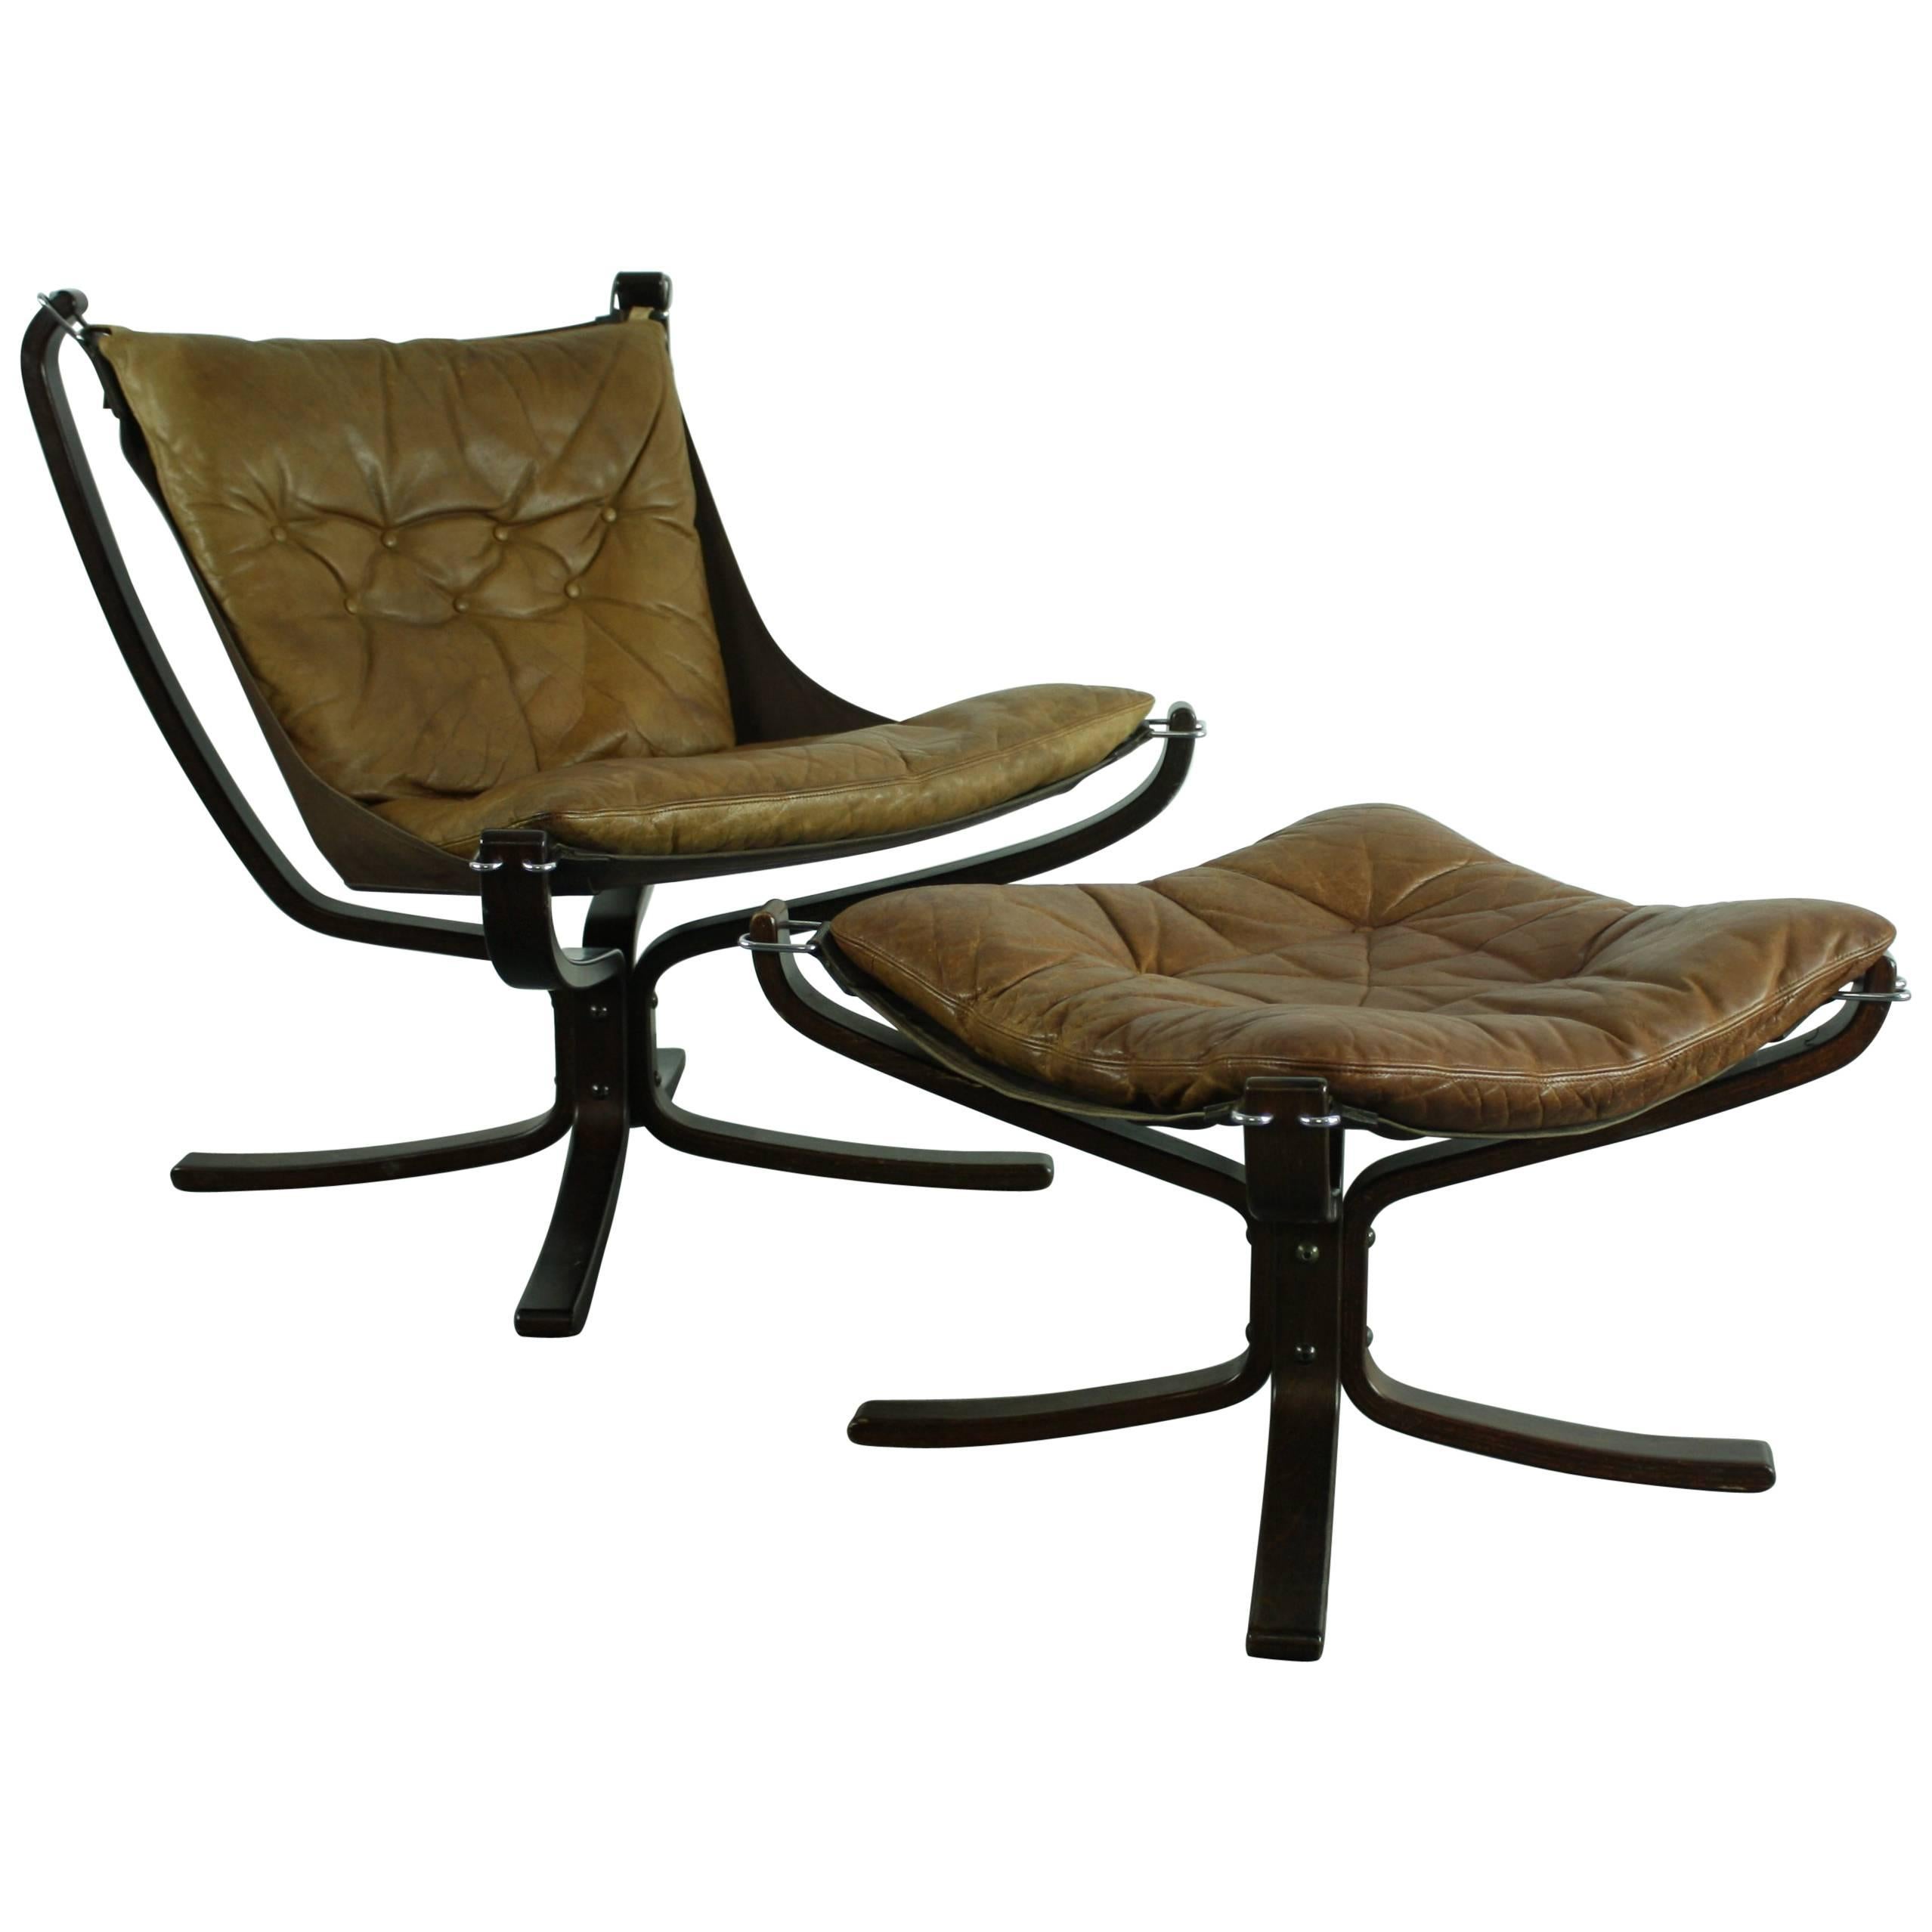 Vintage 1970s Low Back Camel Leather Falcon Chair and Ottoman by Sigurd Resell For Sale